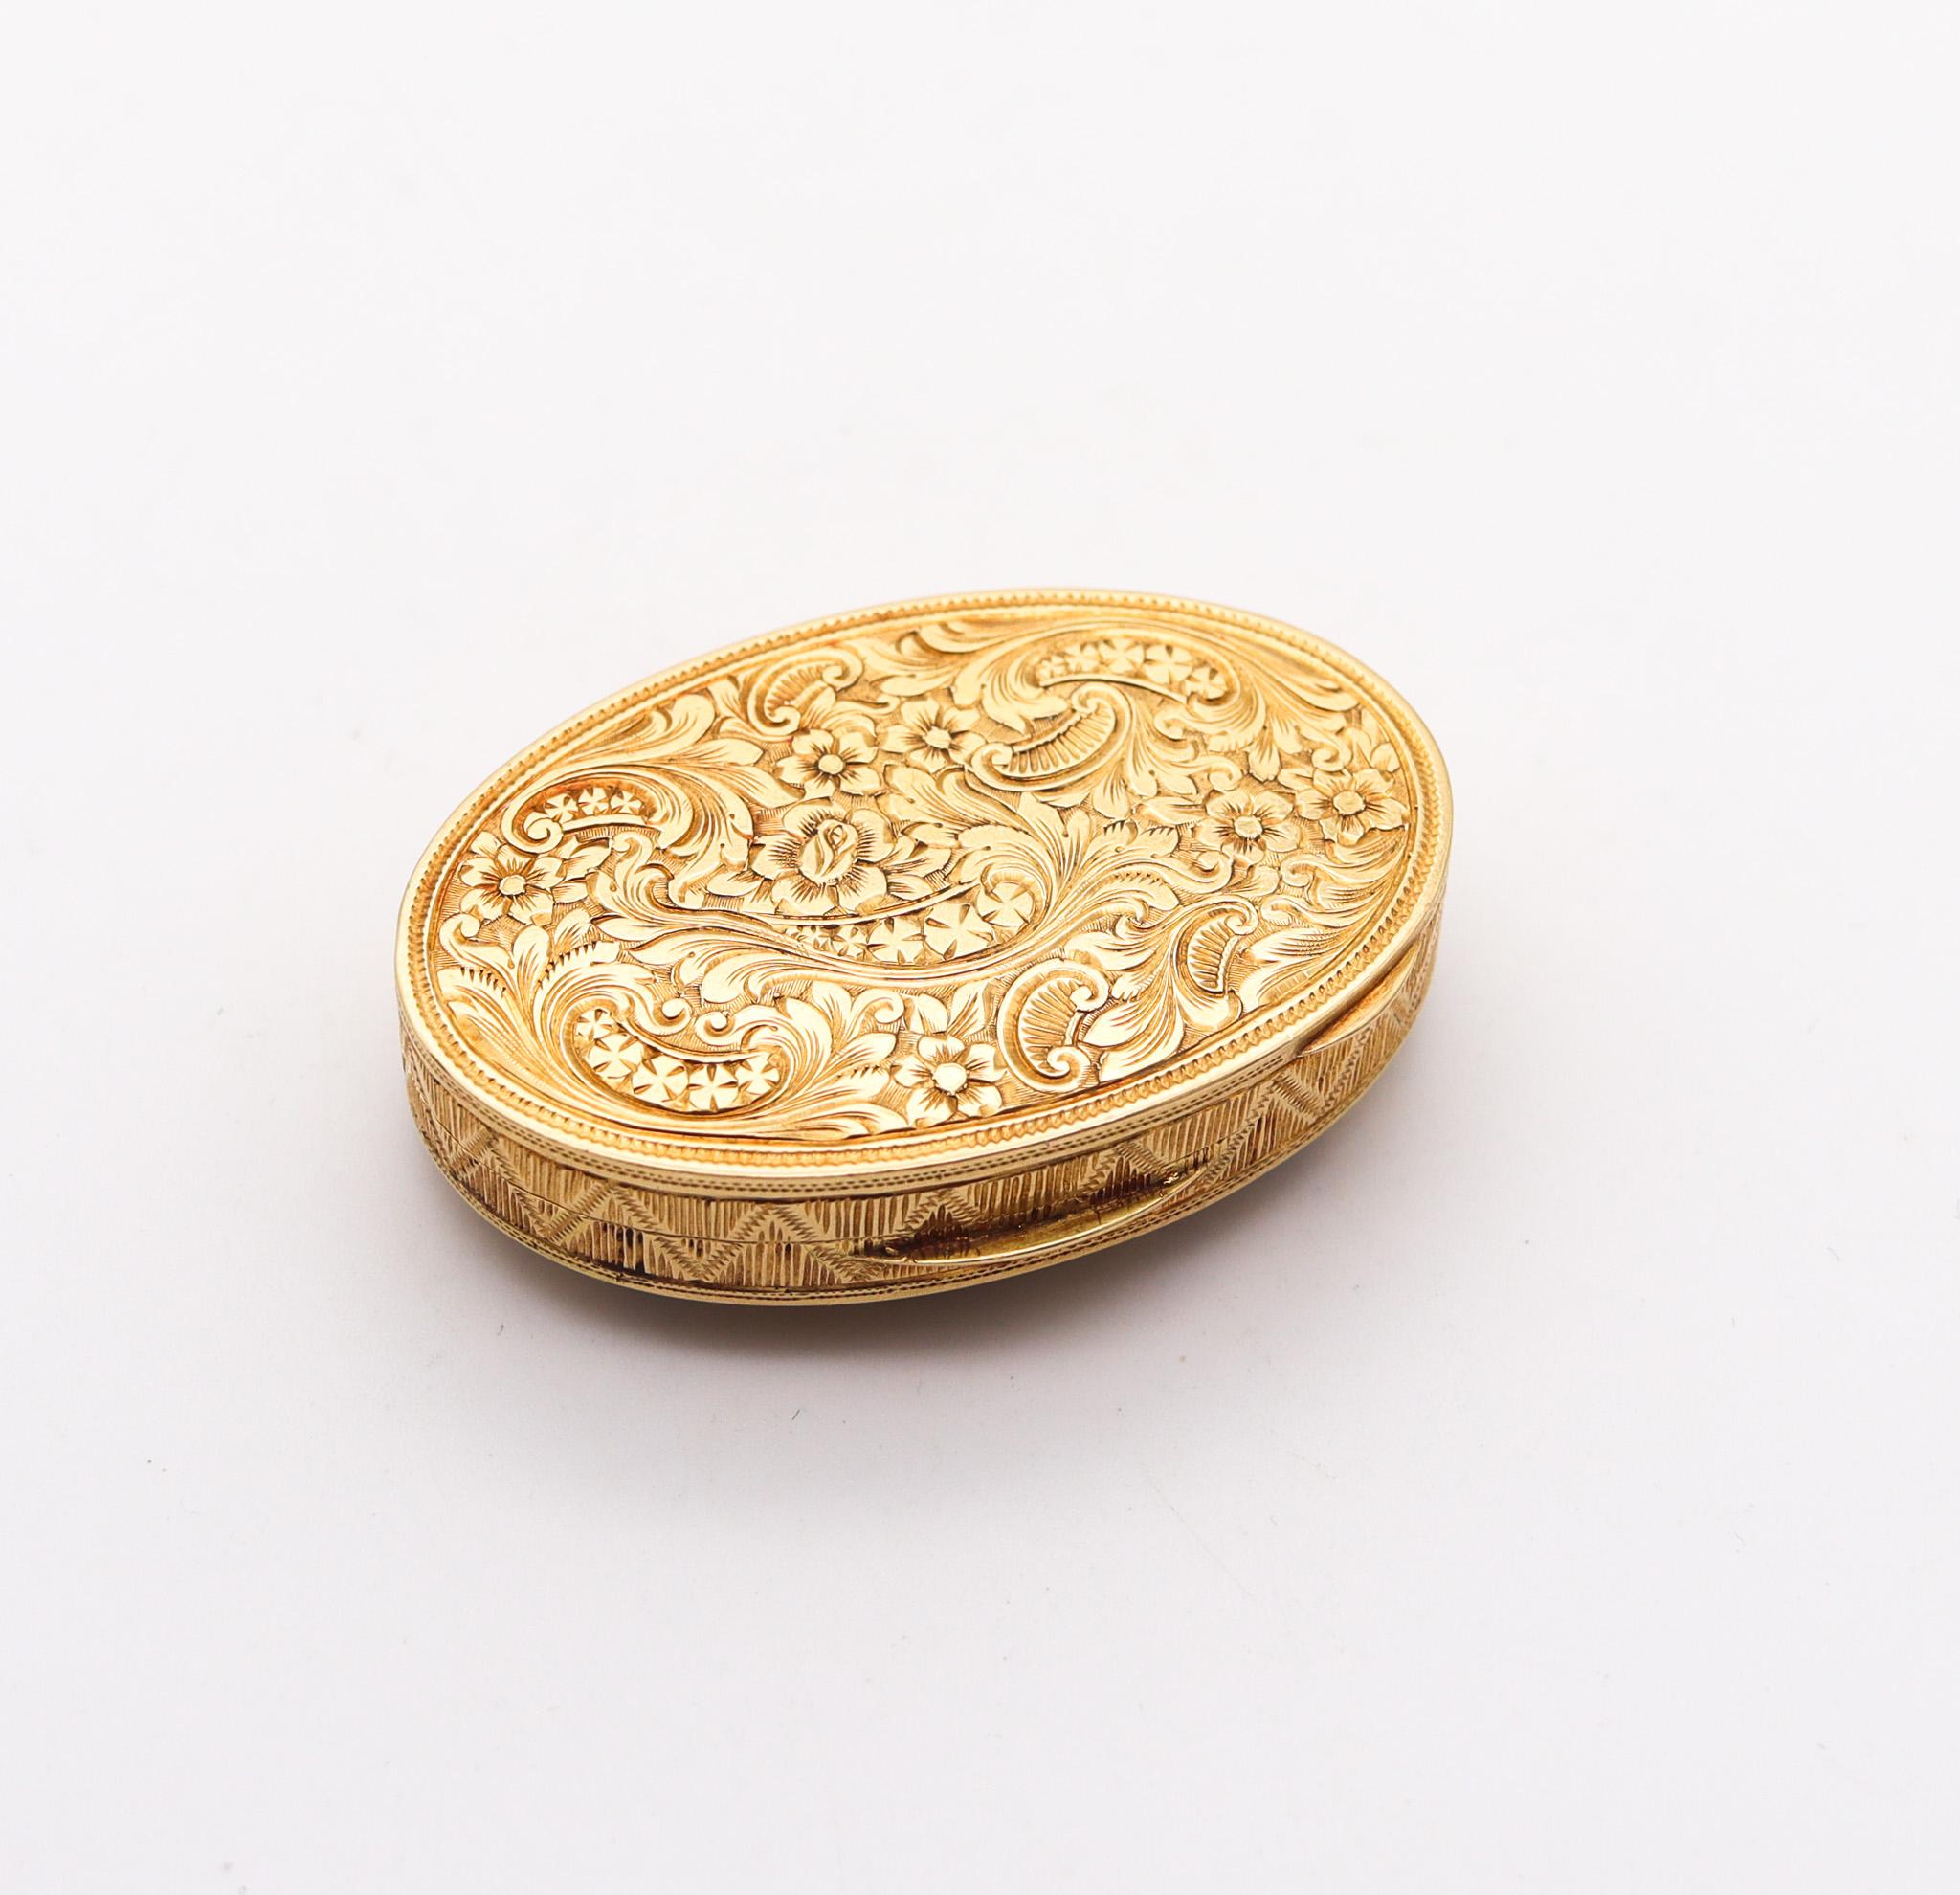 Women's or Men's European 1930 Baroque Revival Blue Enameled Pill Box In Solid 18Kt yellow Gold For Sale